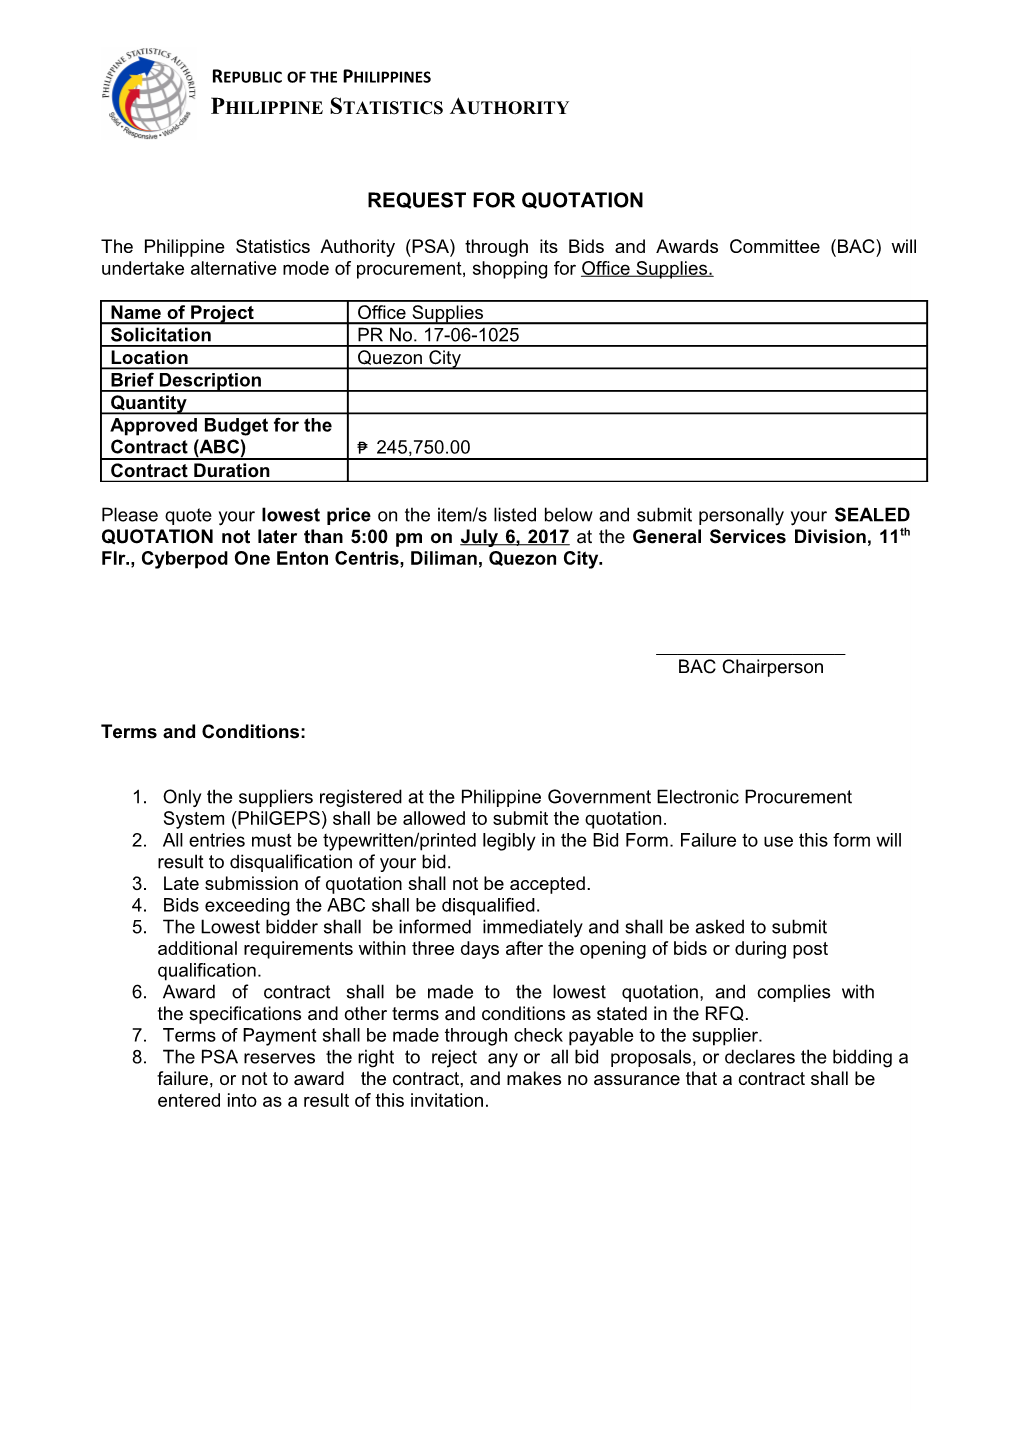 Request for Quotation s51